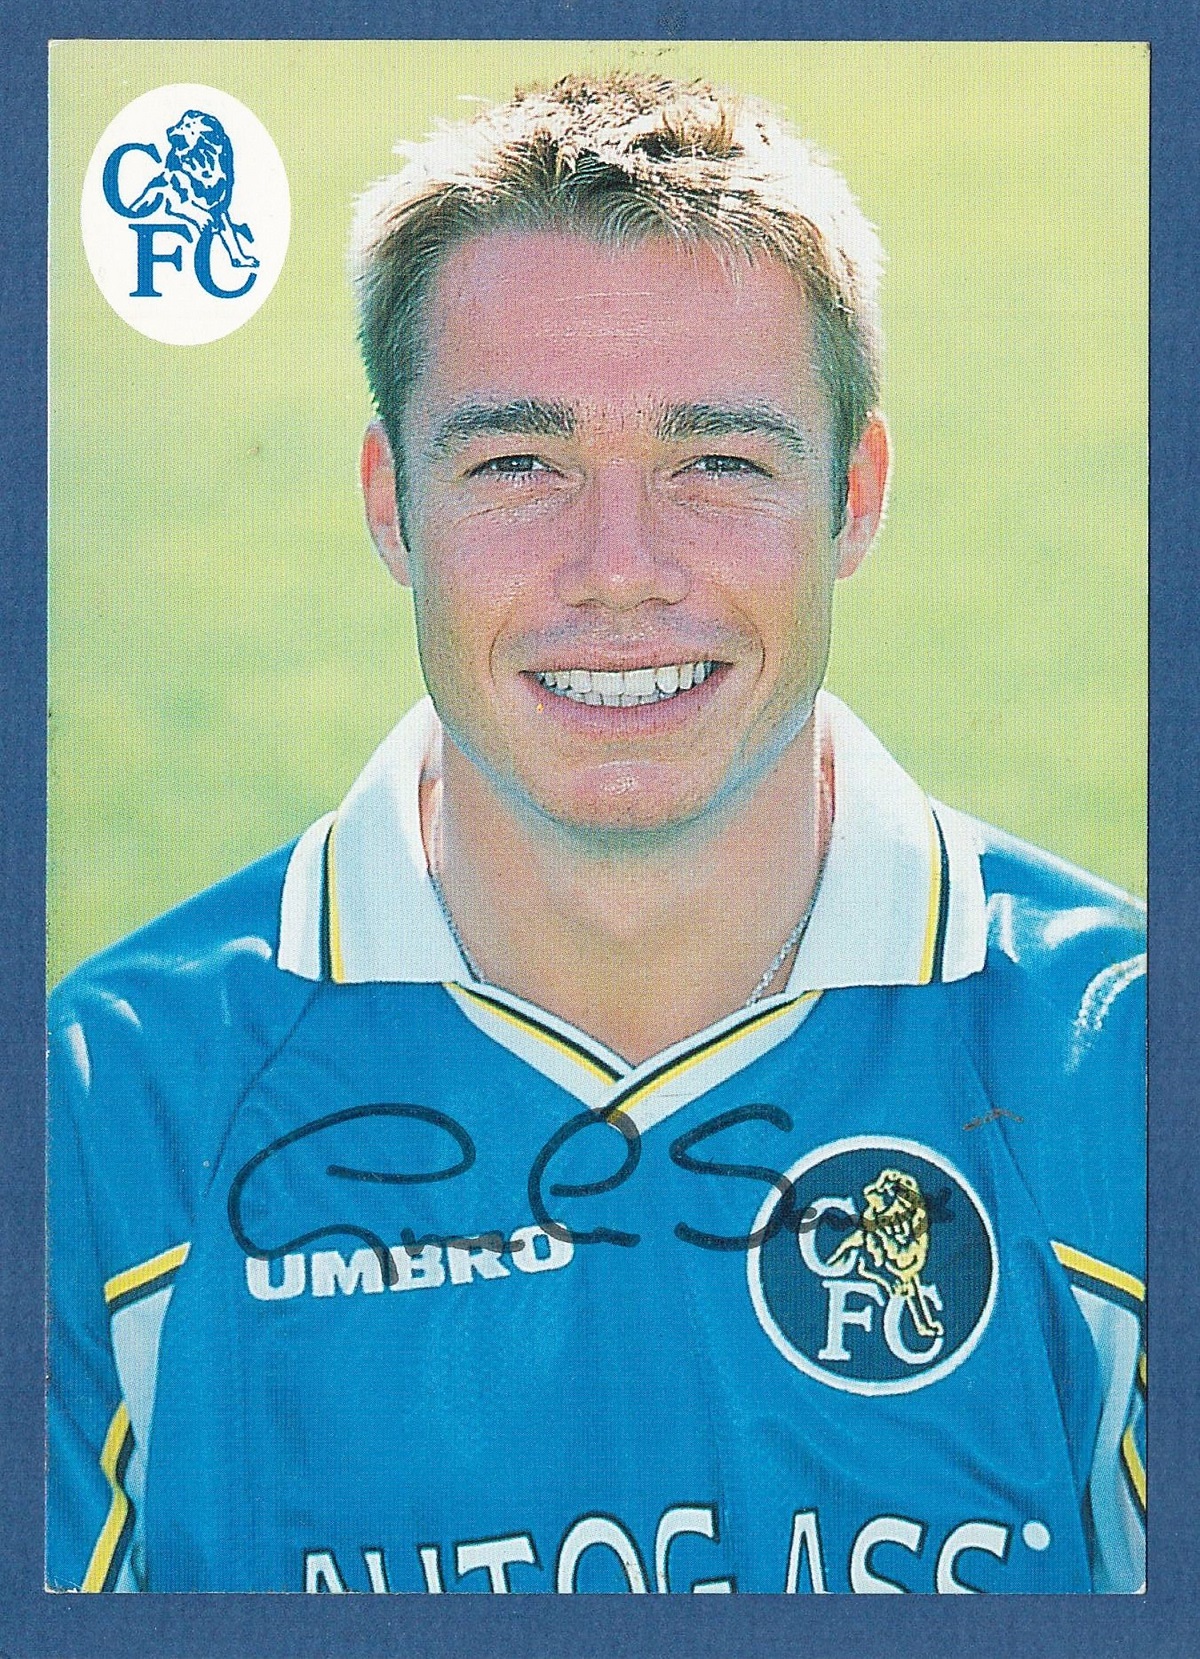 Football. Chelsea. Graeme Le Saux Signed Official Chelsea FC player mounts. 6x5 inches in size. Good